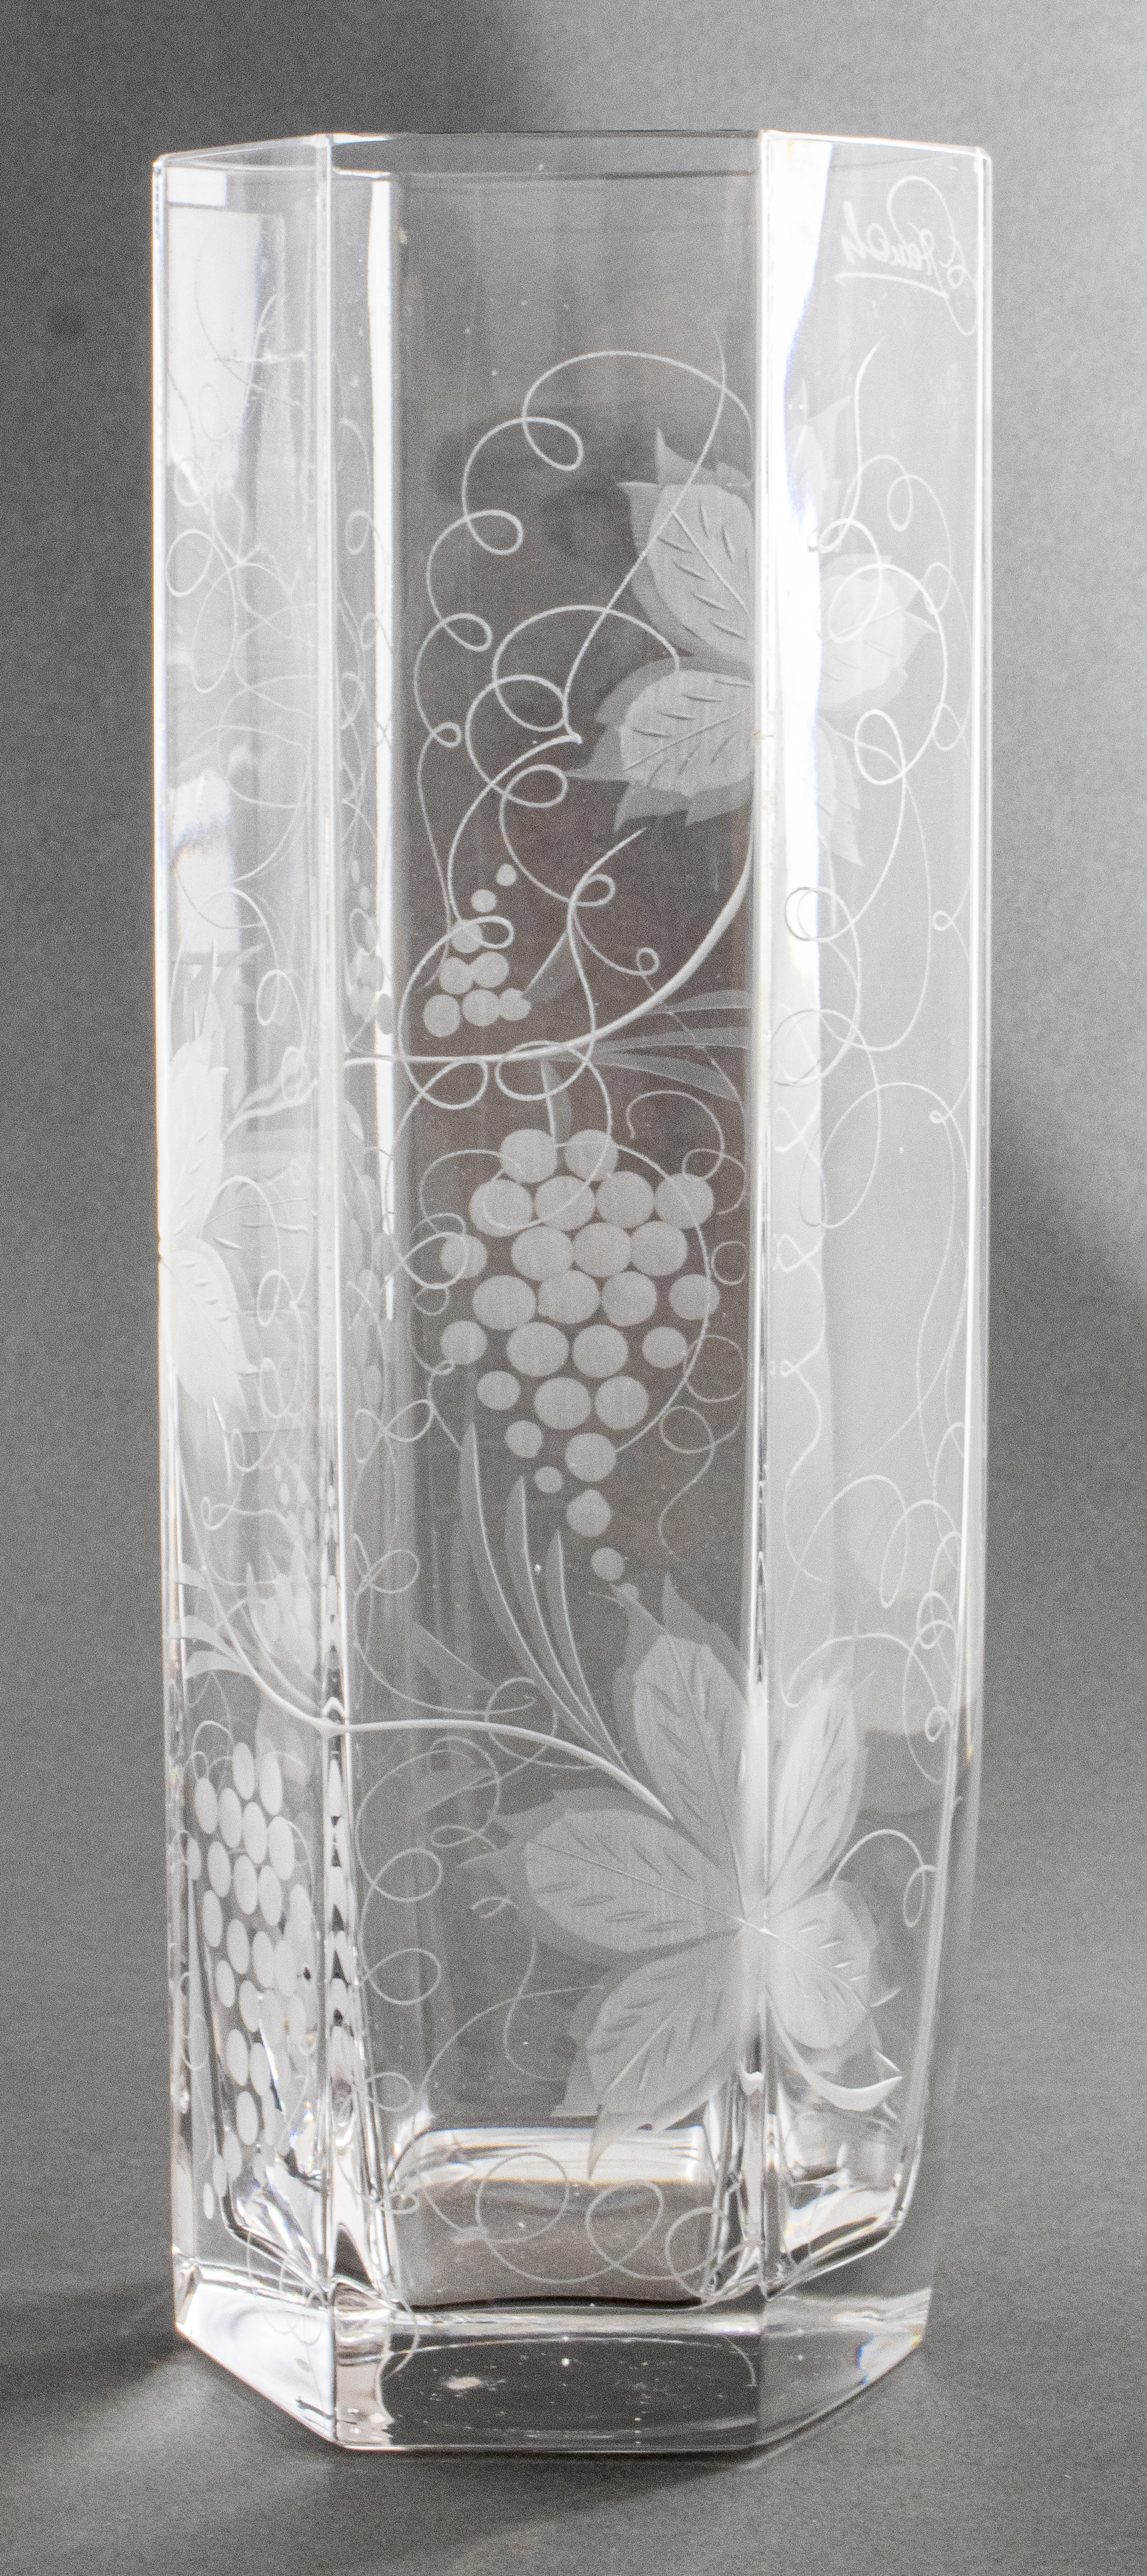 RAUCH HEXAGONAL ETCHED CRYSTAL 363c6a